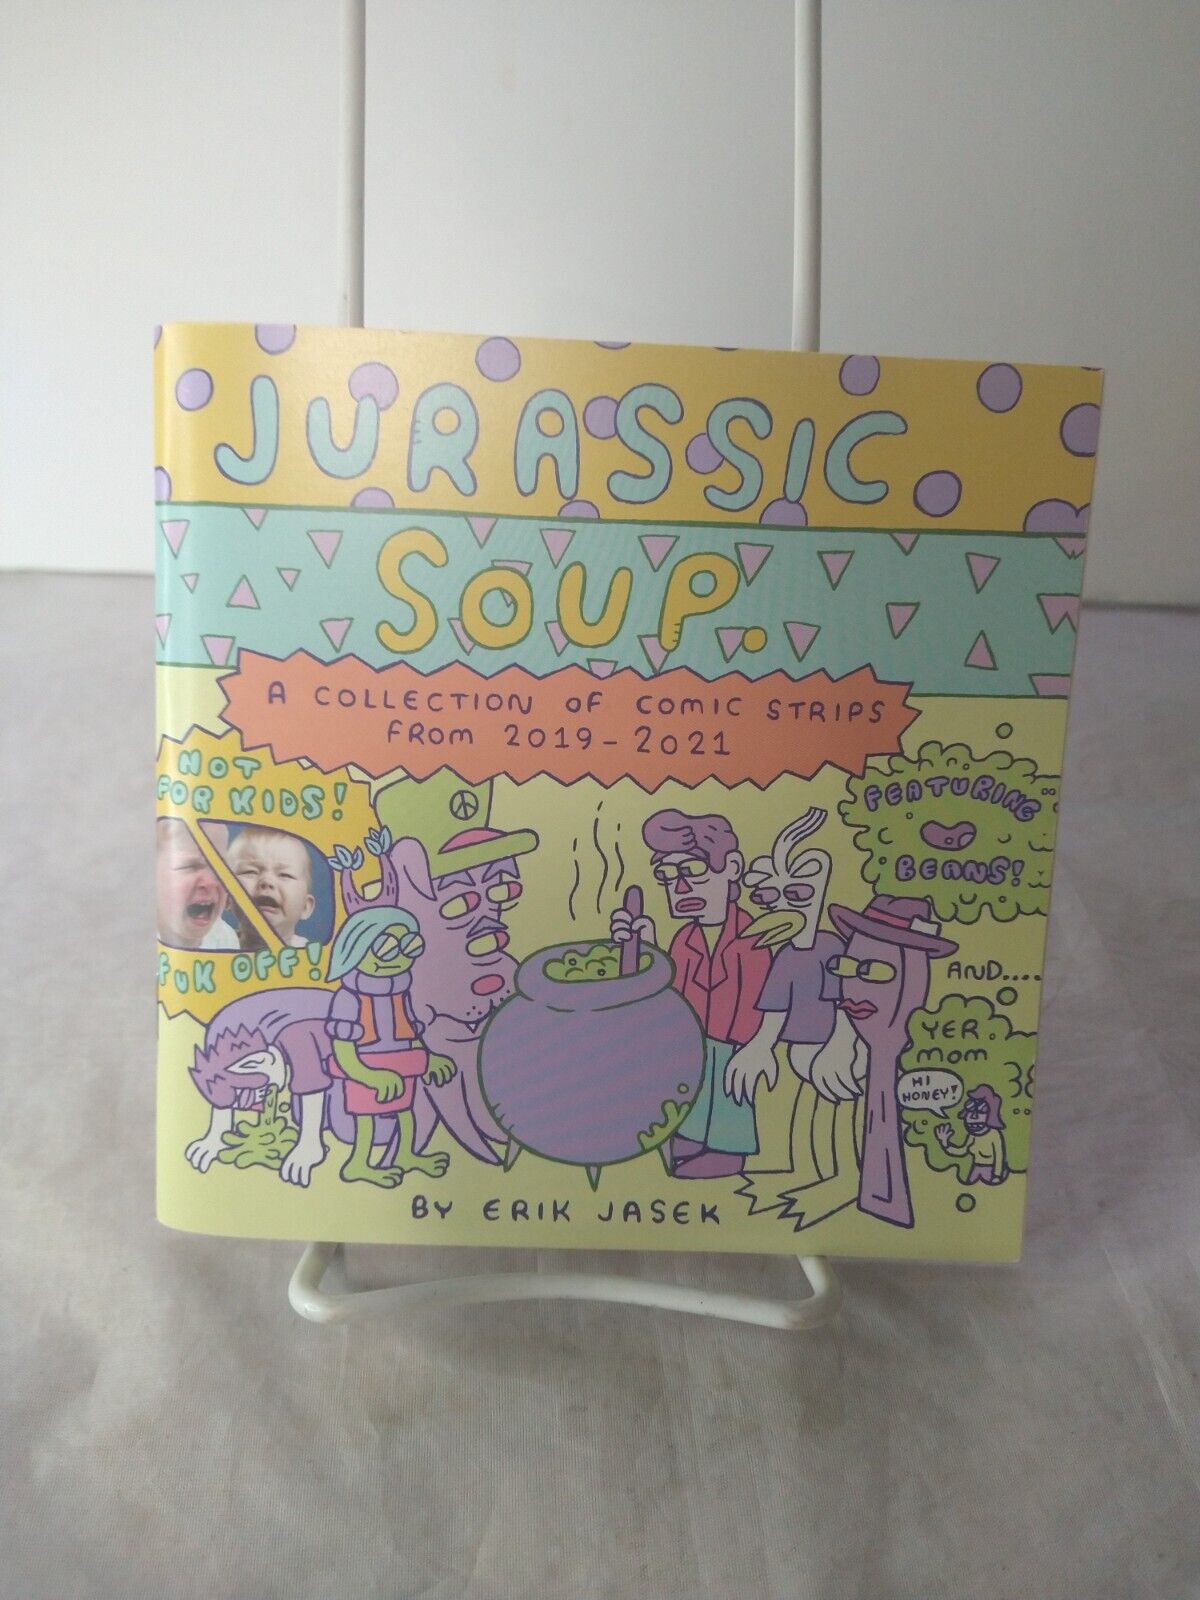 Jurassic Soup: A Collection of Comic Strips From 2019-2021 by Erik Jasek